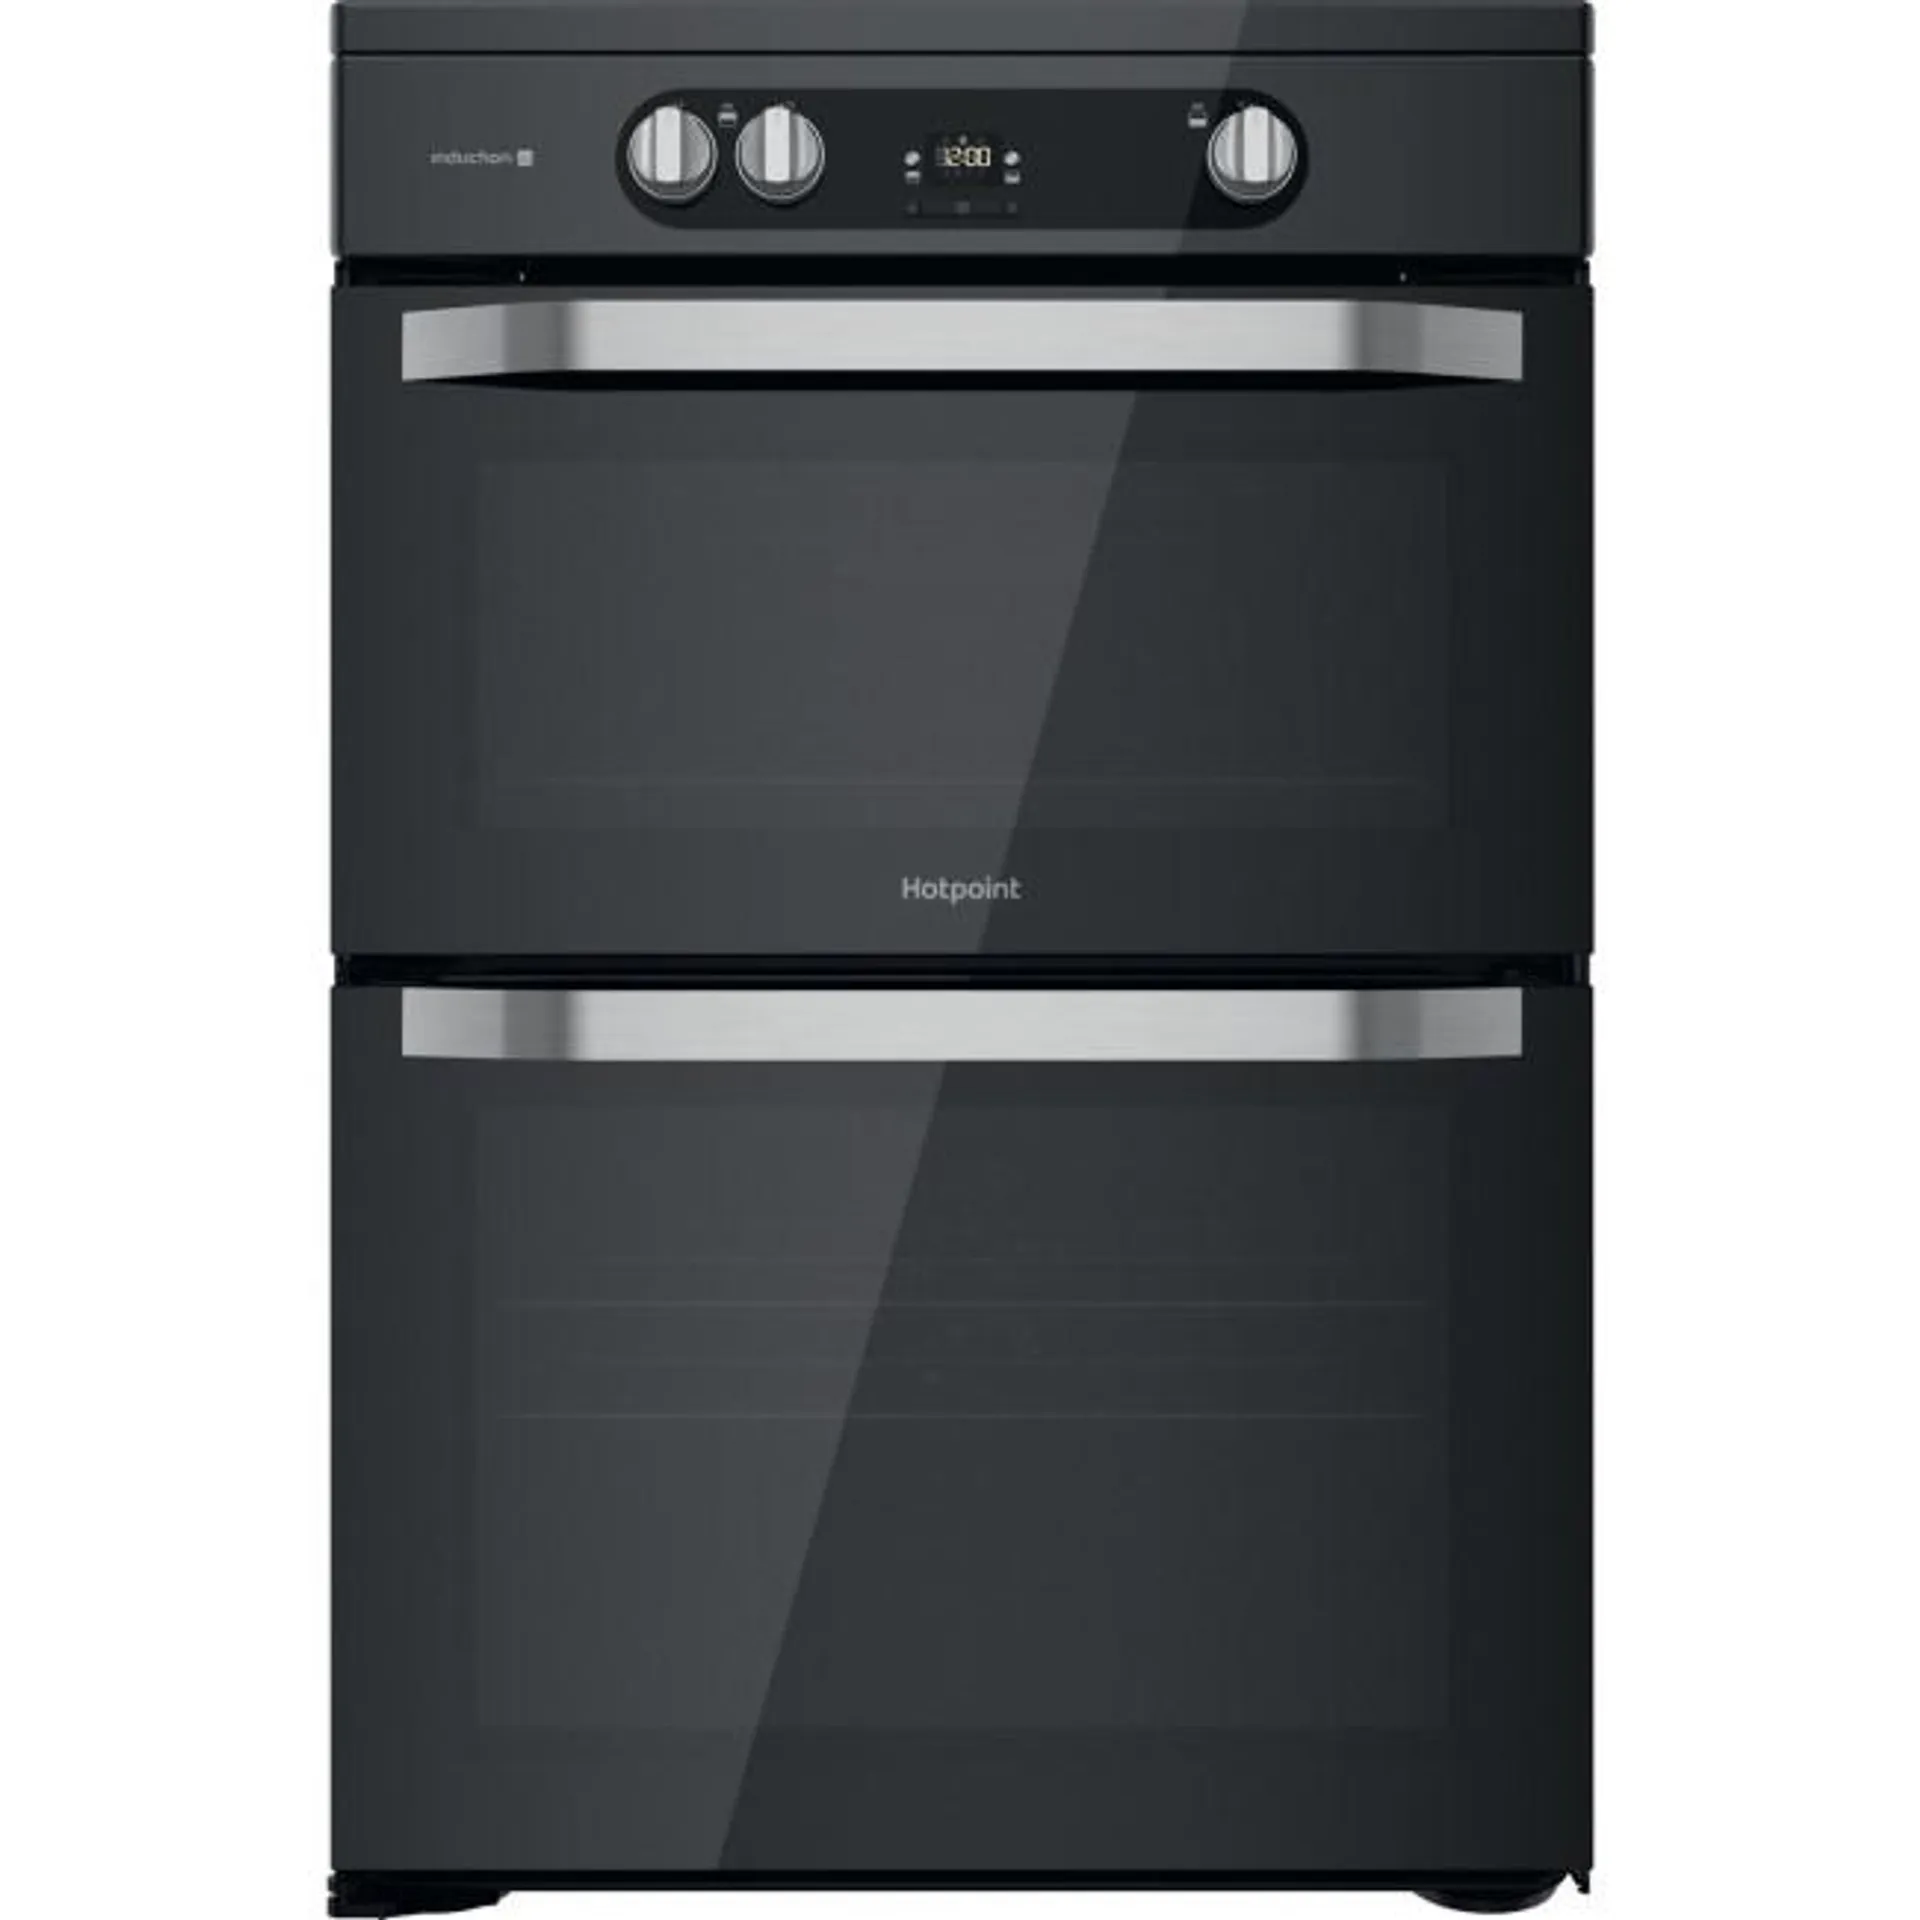 Hotpoint 60cm Double Oven Induction Electric Cooker - Black